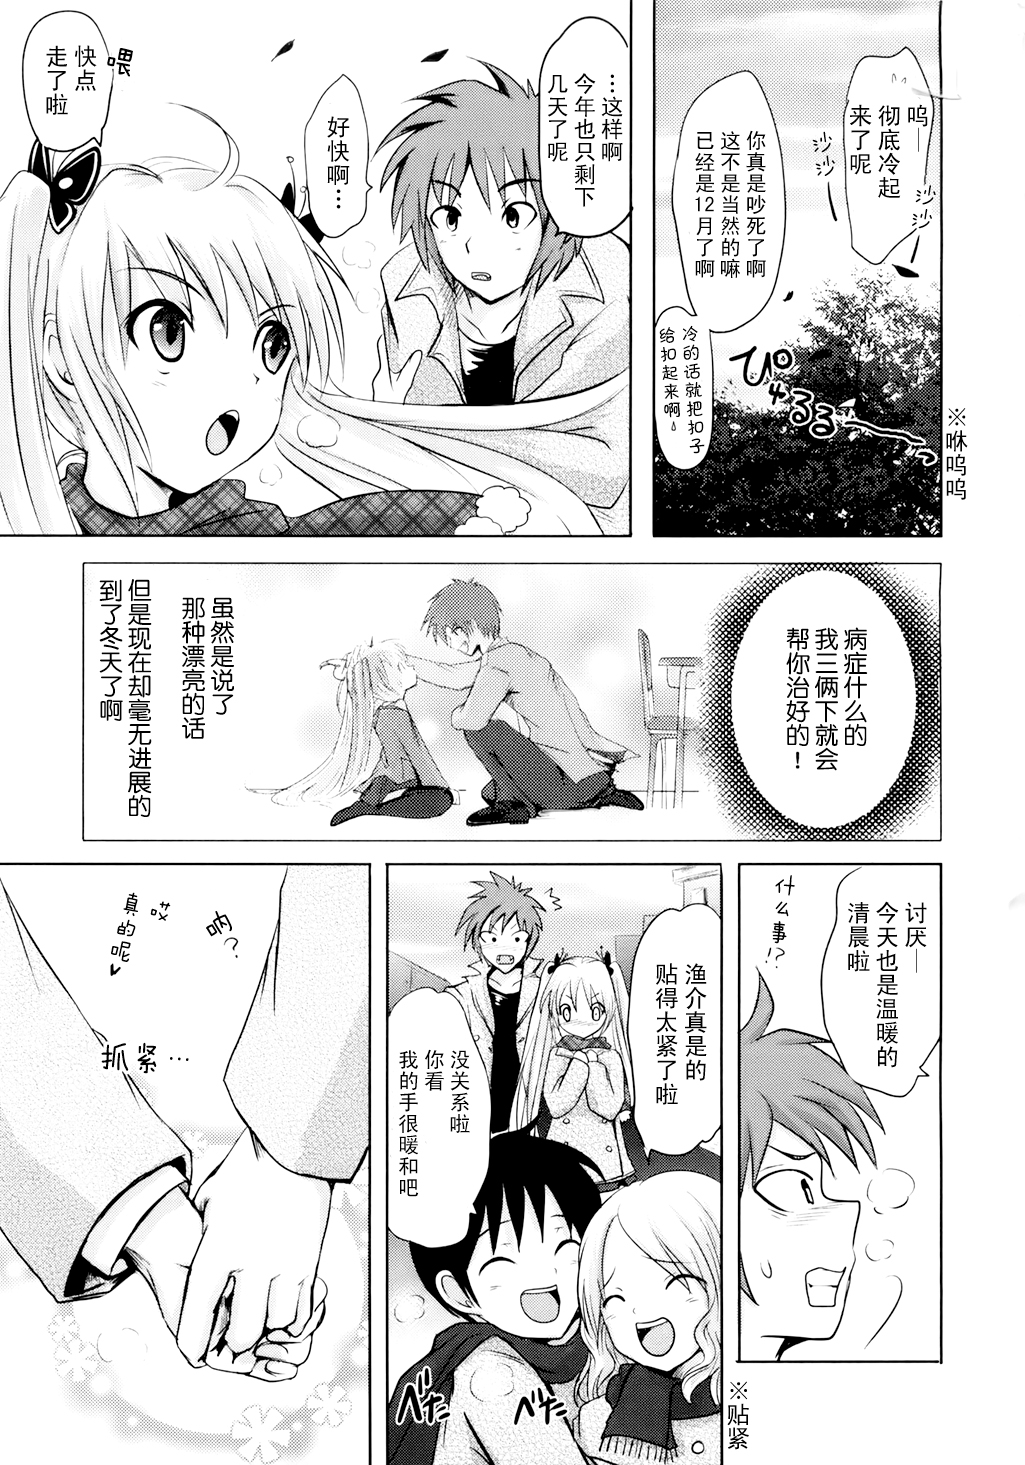 [Natsume Fumika] Sundere! Ch.7 [Chinese] [夏目文花] スンデレ! CH7 [中文翻譯]